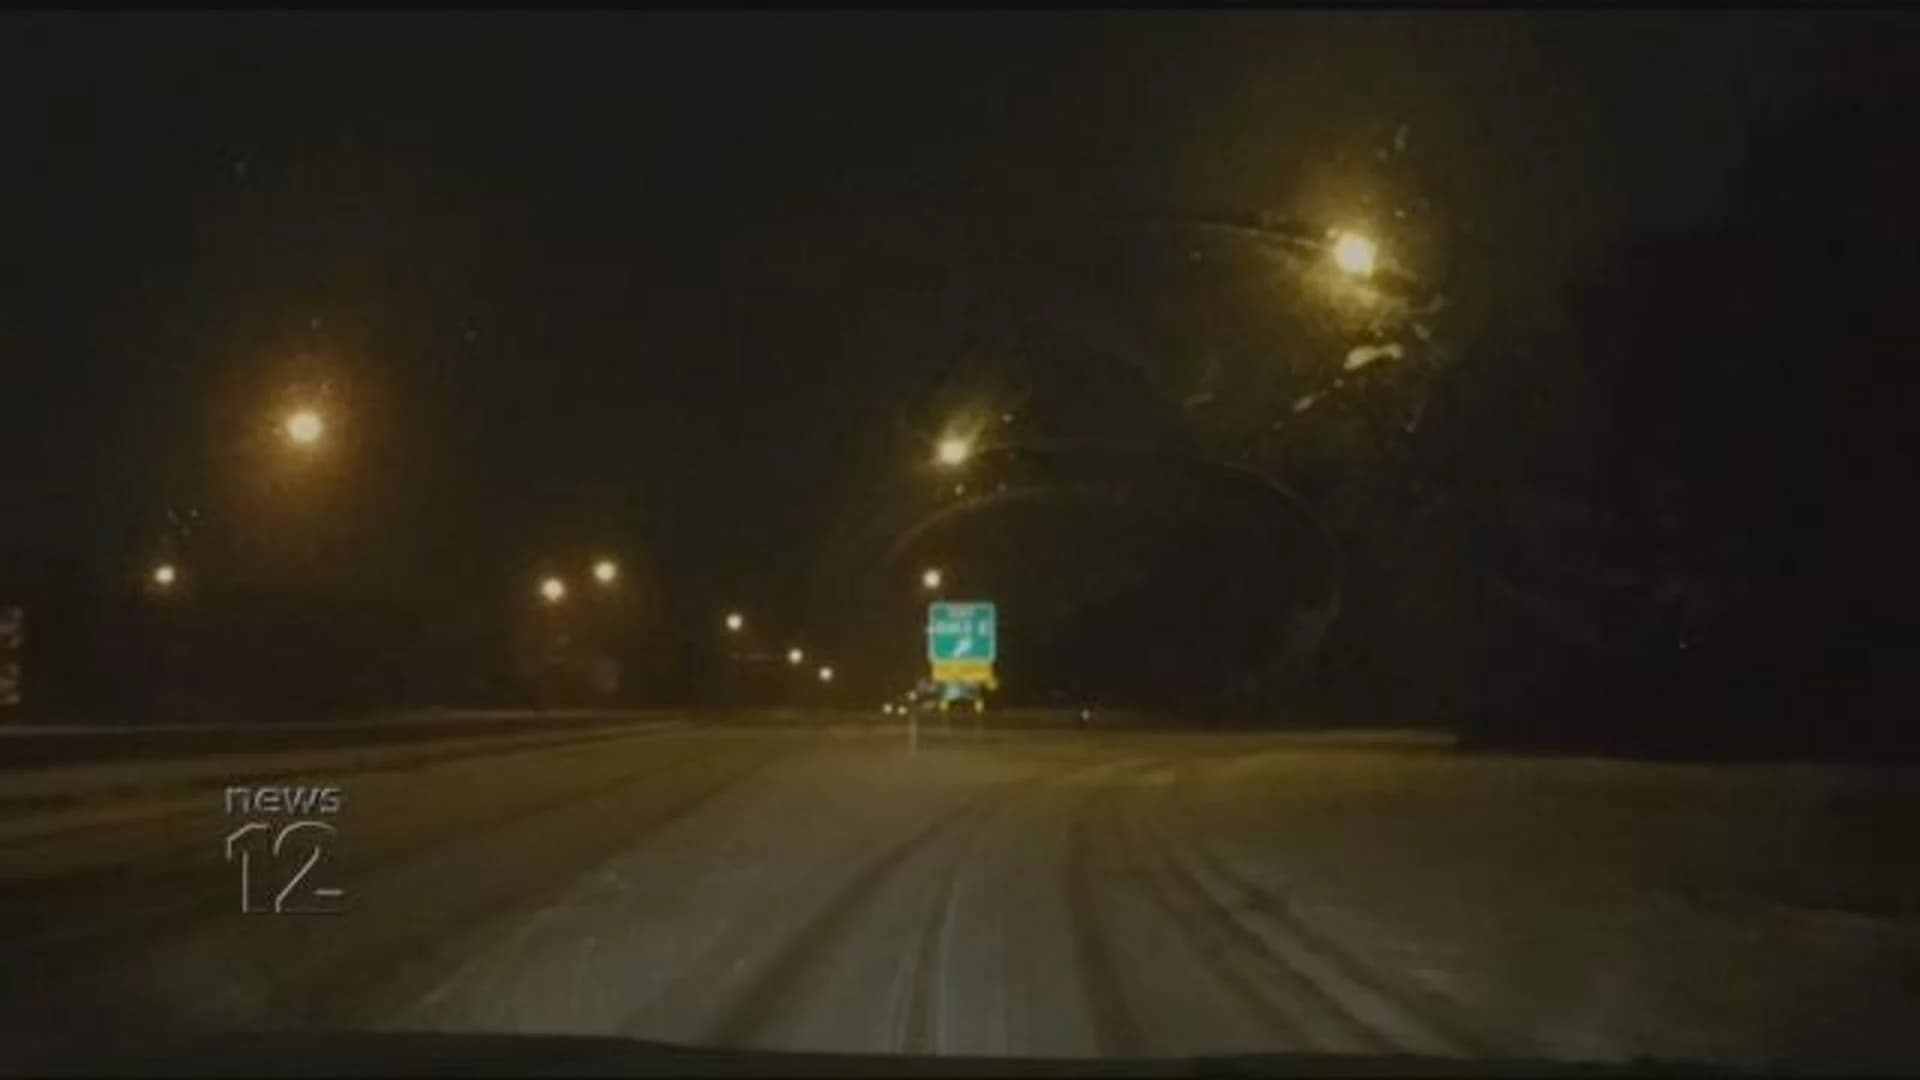 Early morning commuters forced to take it slow on icy roadways